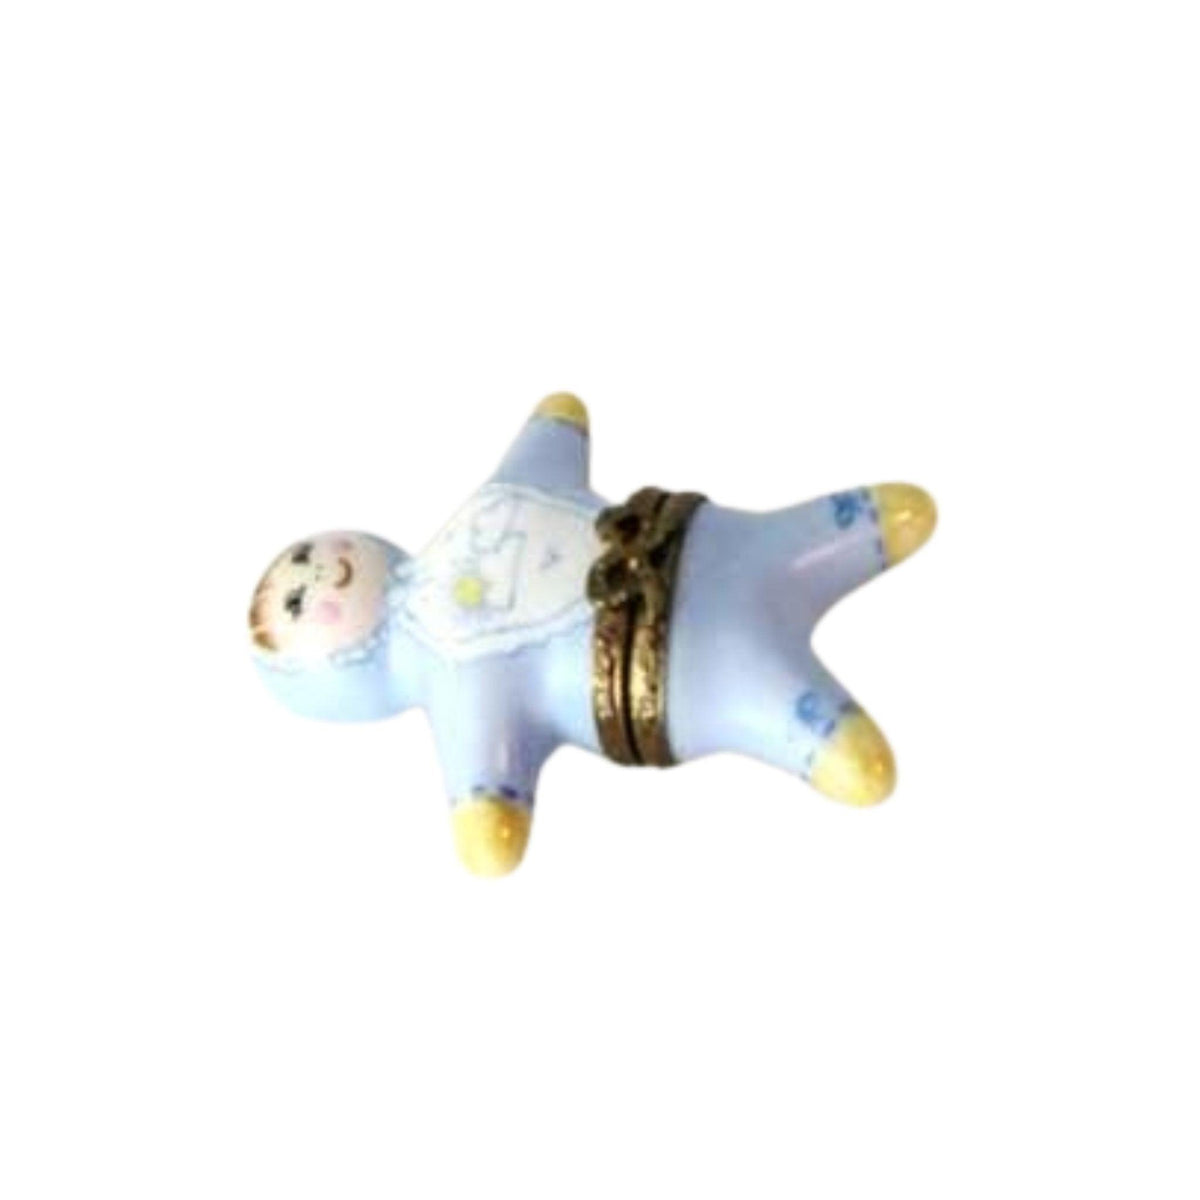 Baby Boy figurine - VERY Limoges Box Figurine - Limoges Box Boutique